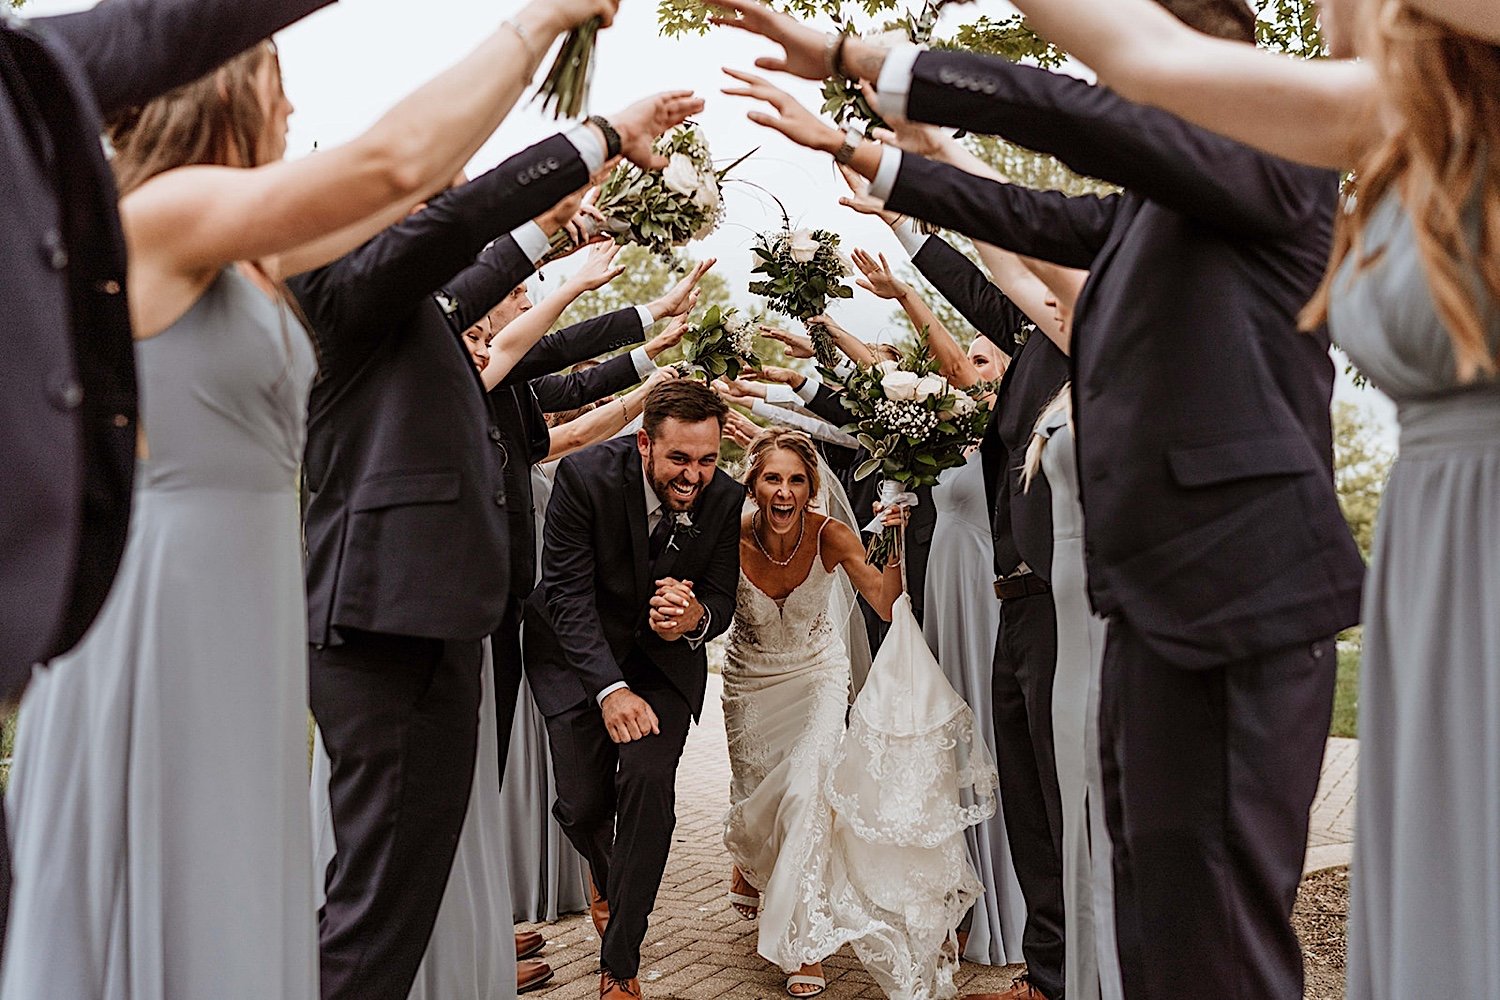 Fun must have photos to do with your wedding party